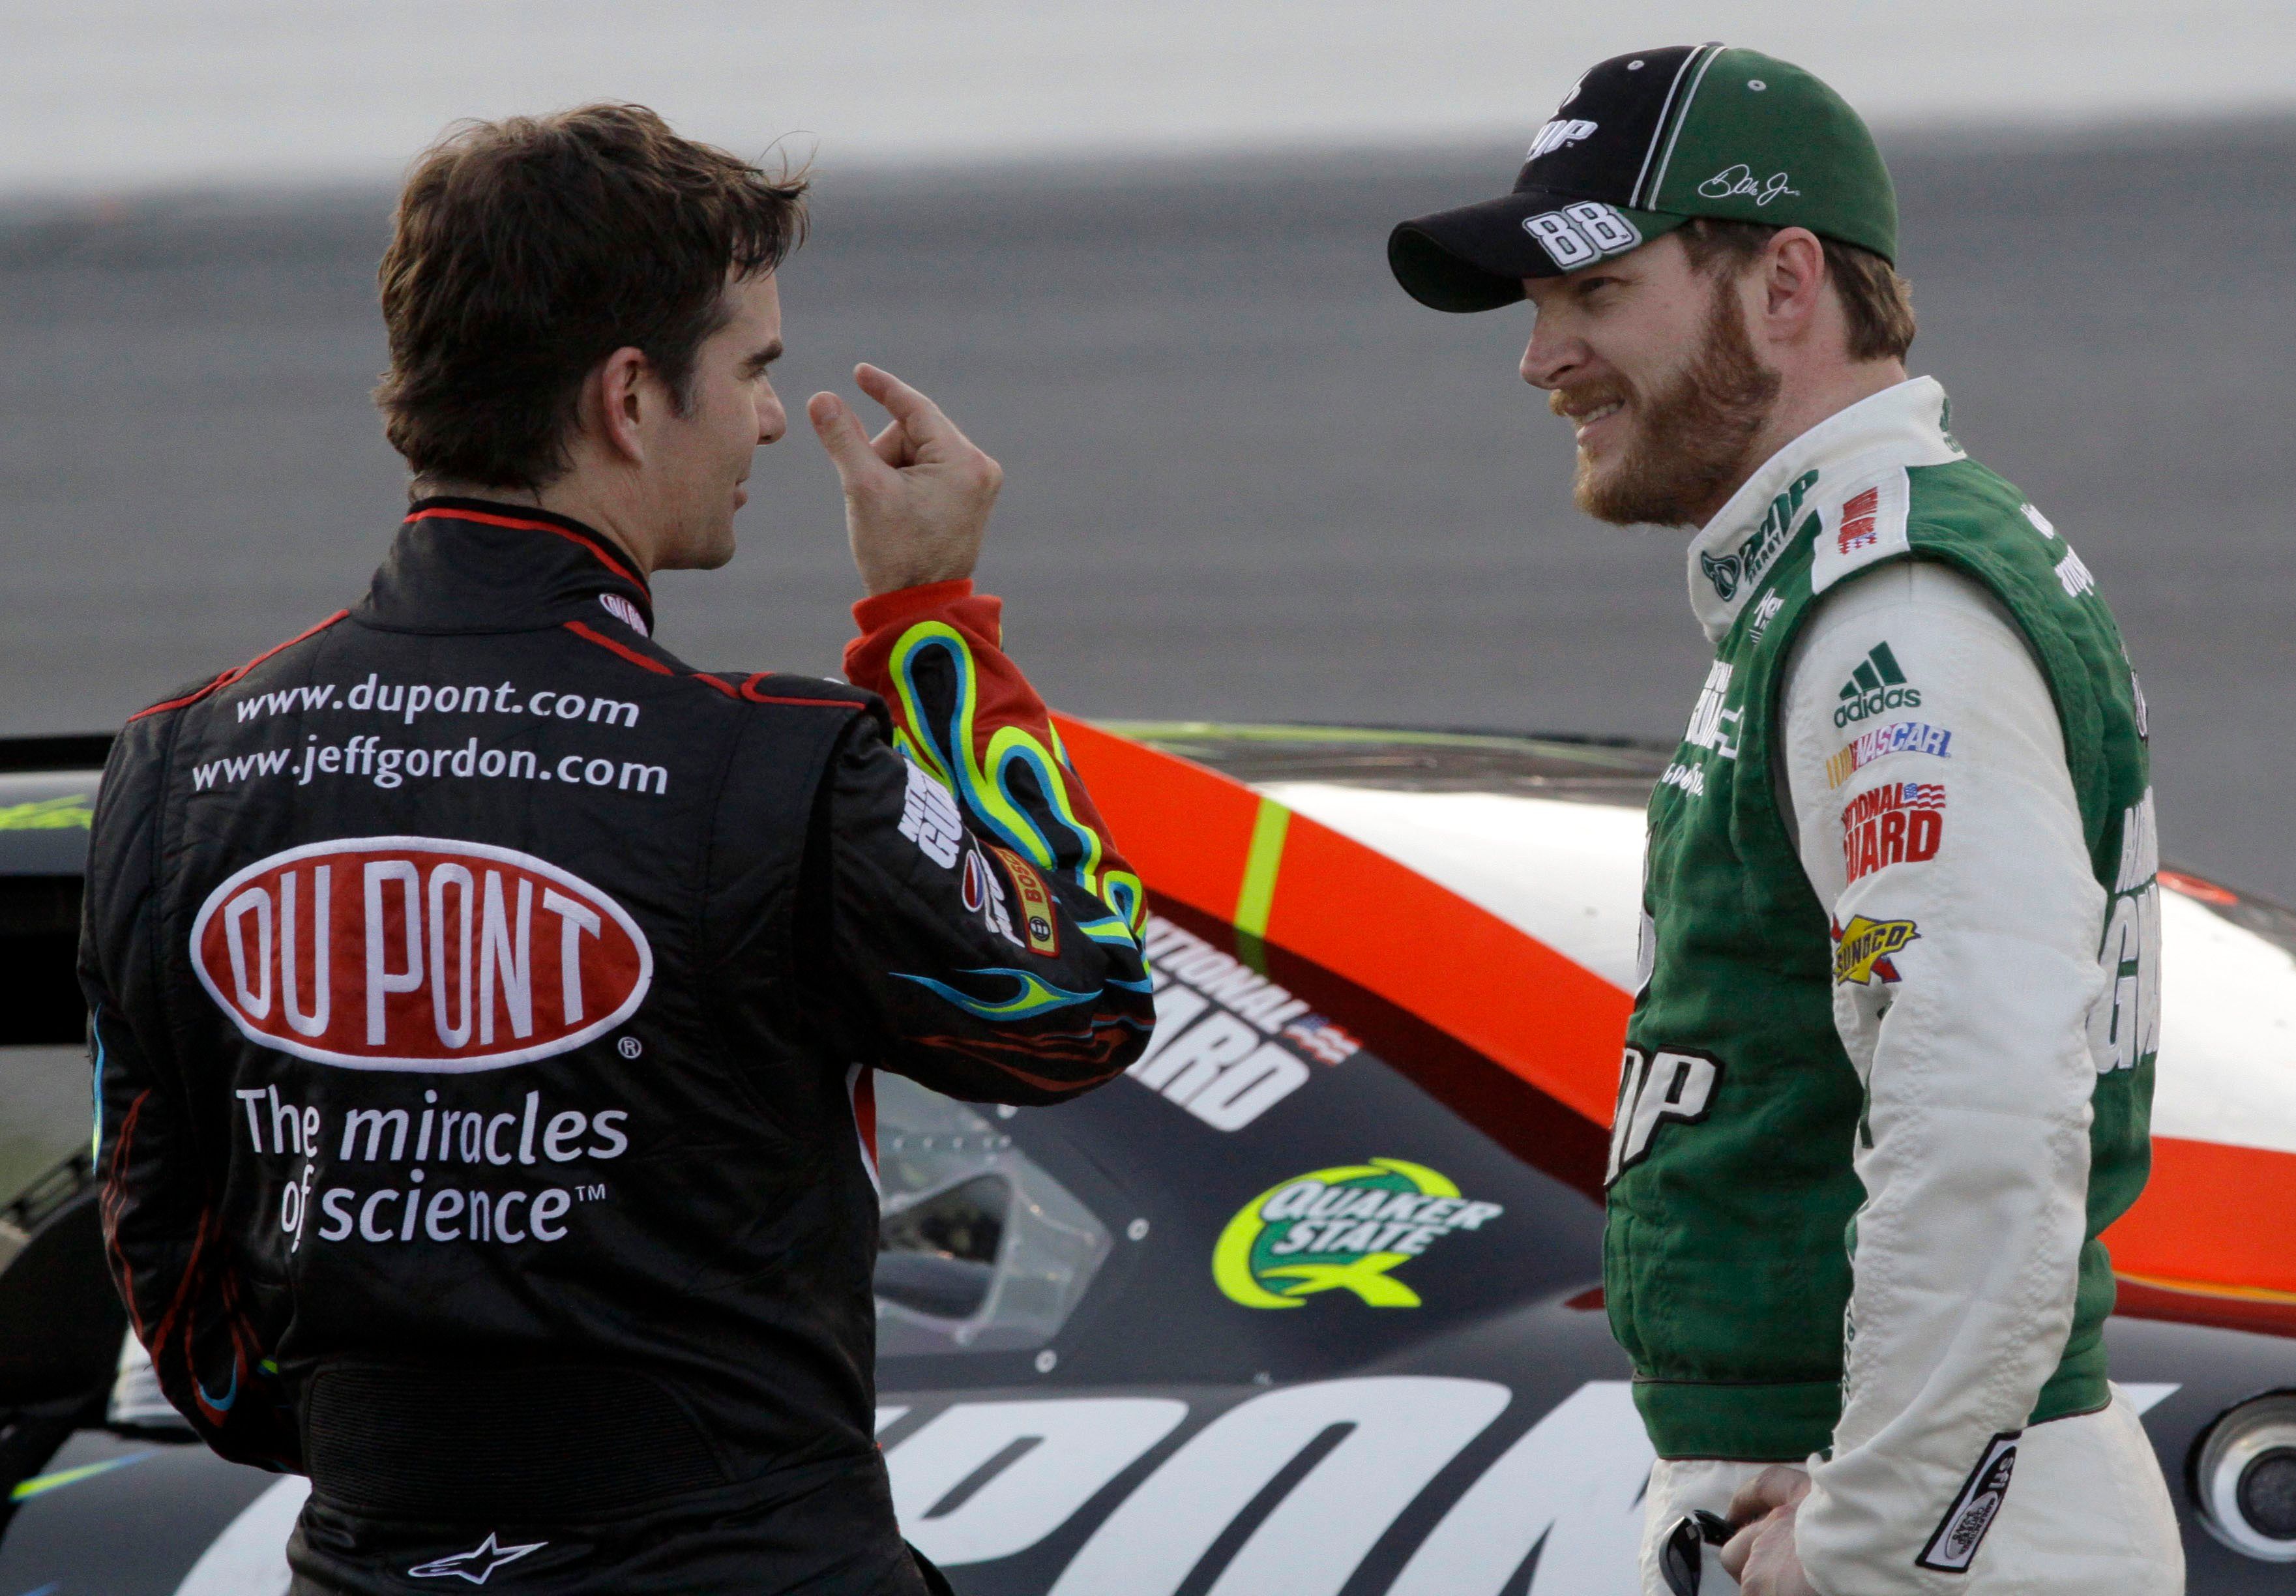 Jeff Gordon, left, and Dale Earnhardt Jr. chat during the second red-flag delay at the Daytona 500 due to a pothole